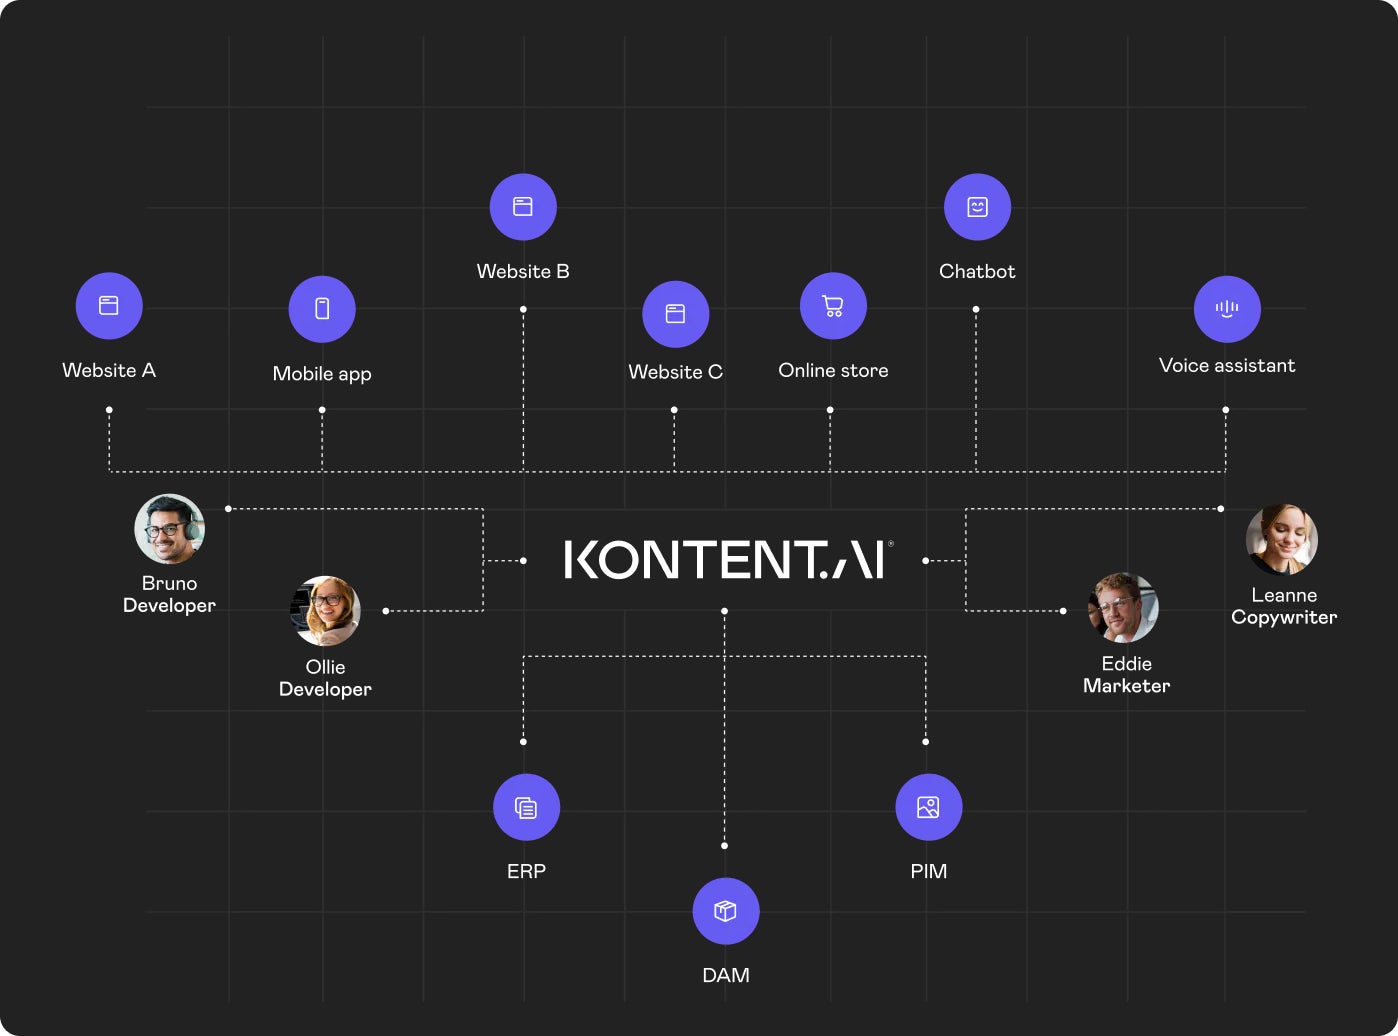 Kontent.ai distributing to many channels from a single source.